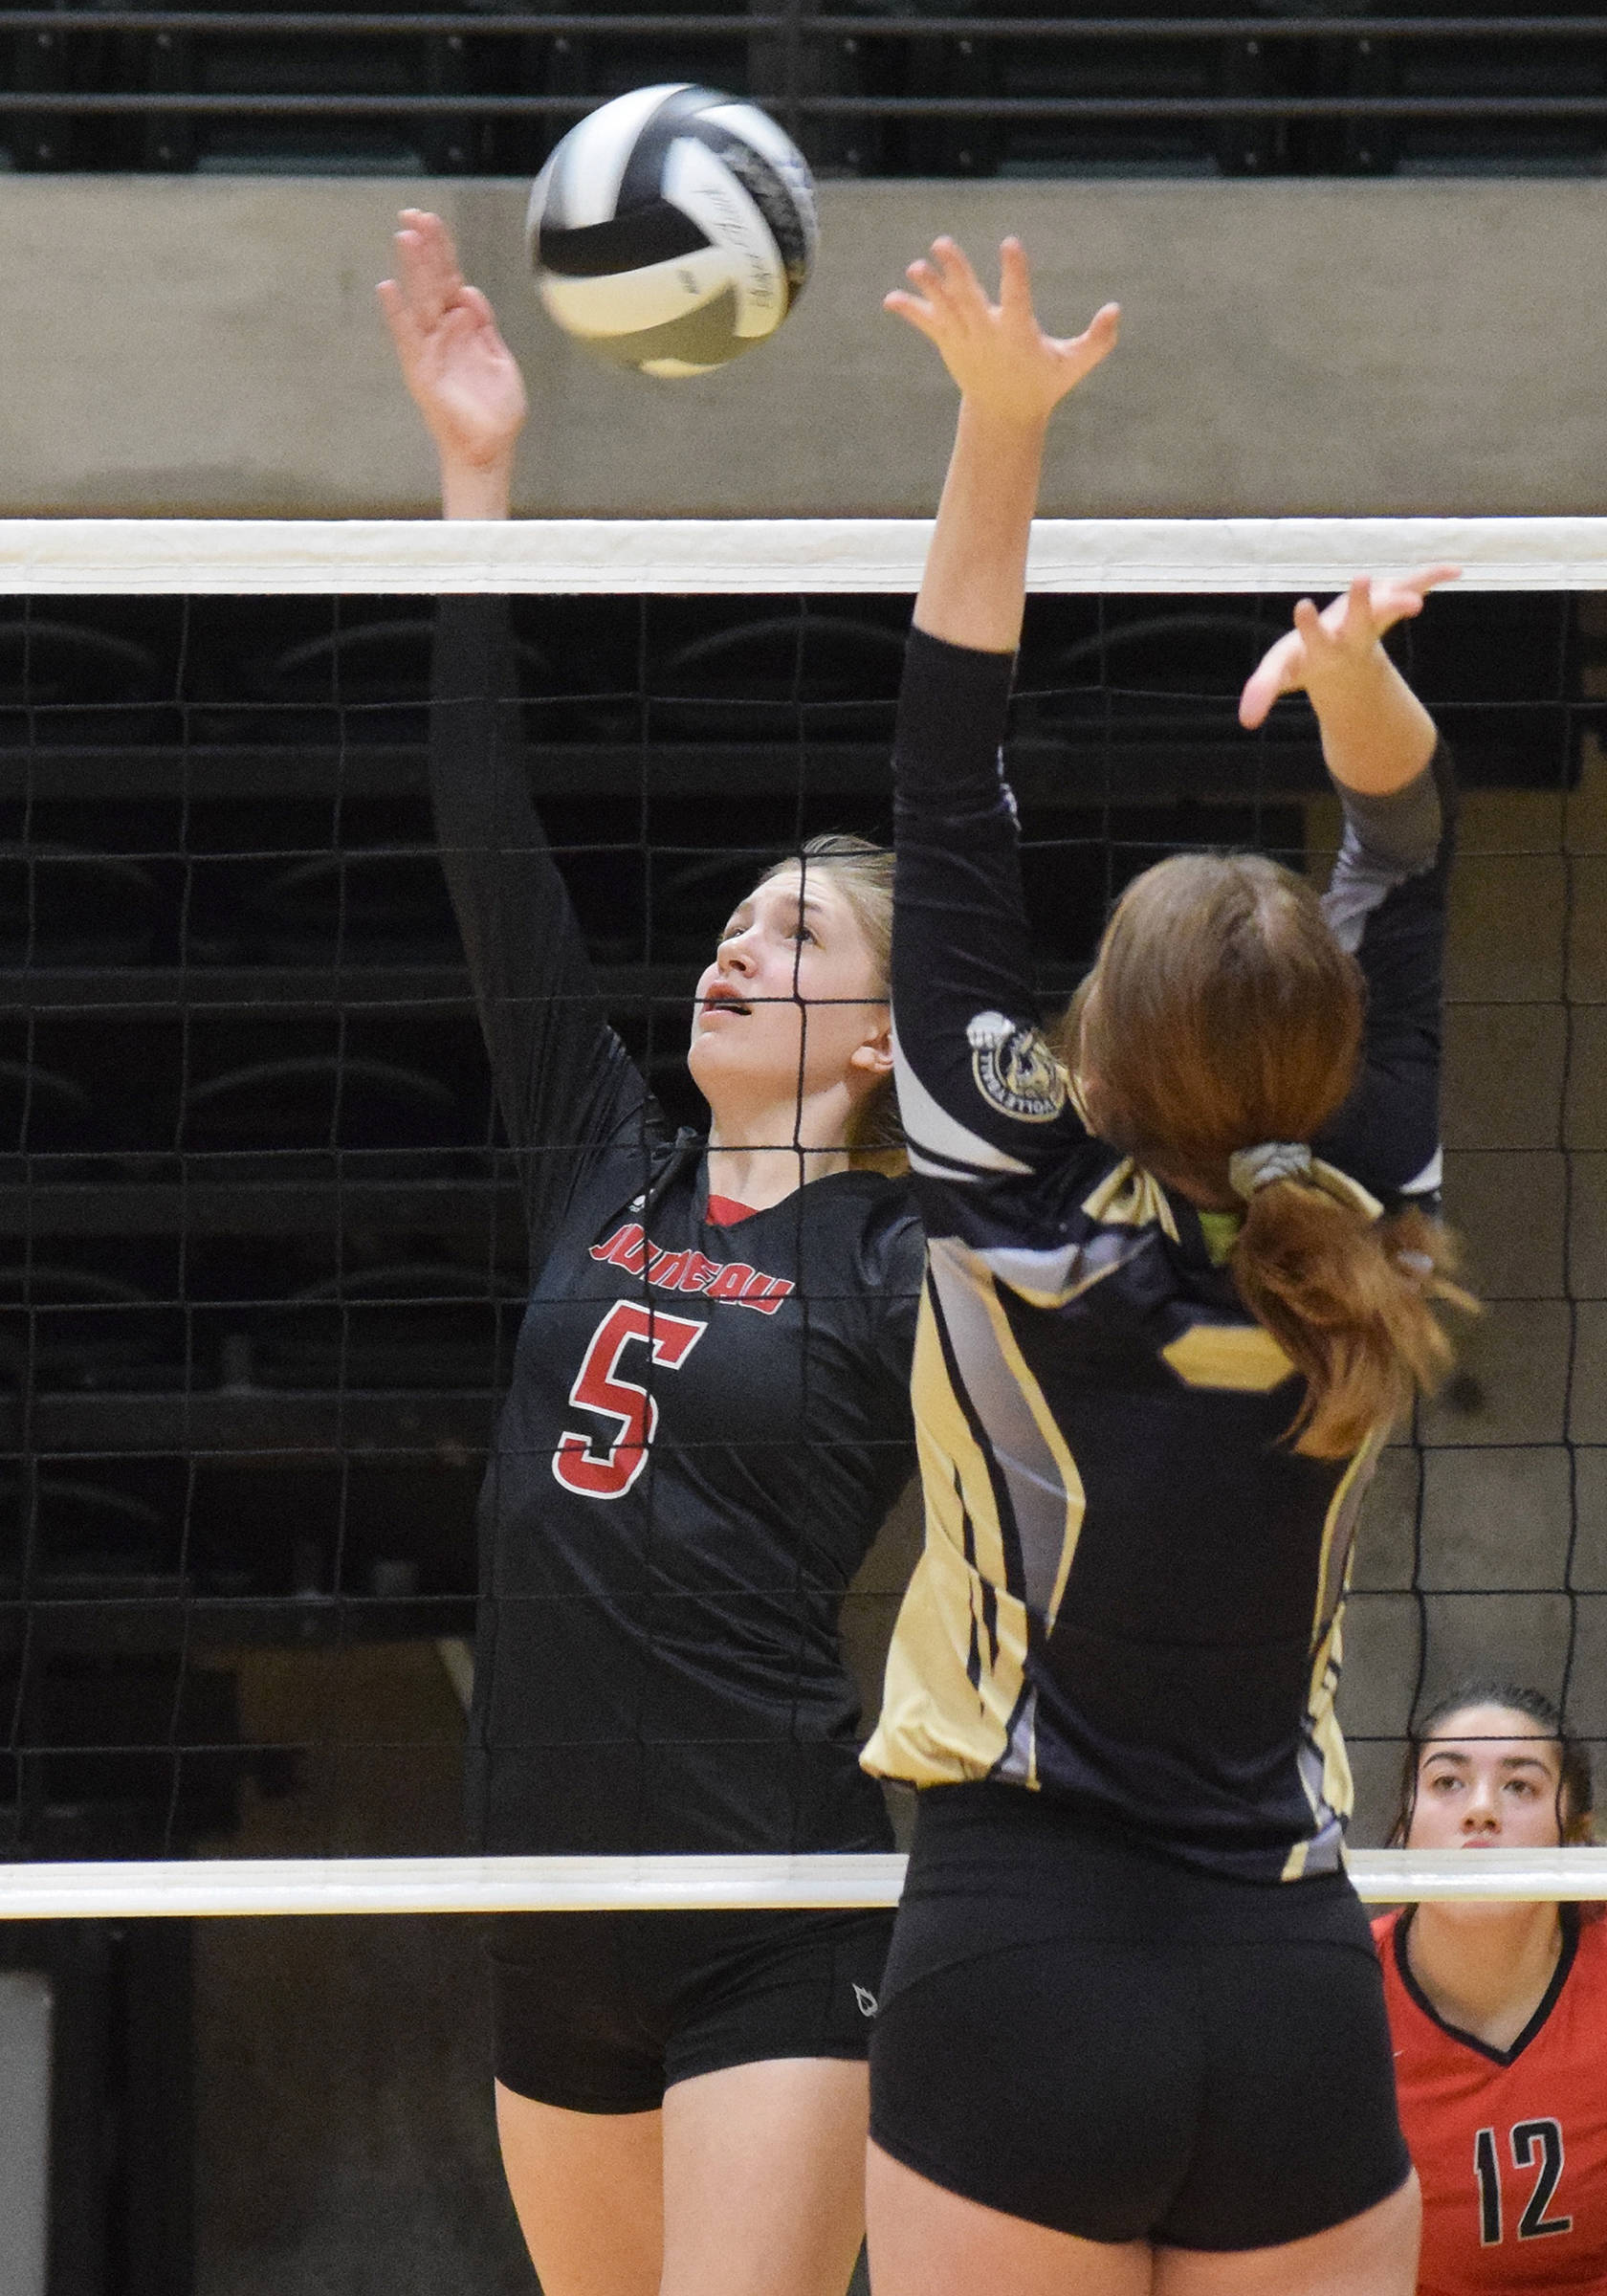 Juneau-Douglas High School: Yadaat.at Kalé sophomore Brooke Sanford gets up a shot against South Anchorage, Thursday, Nov. 14, 2019, at the Class 4A state volleyball tournament at the Alaska Airlines Center in Anchorage, Alaska. (Joey Klecka | Peninsula Clarion)